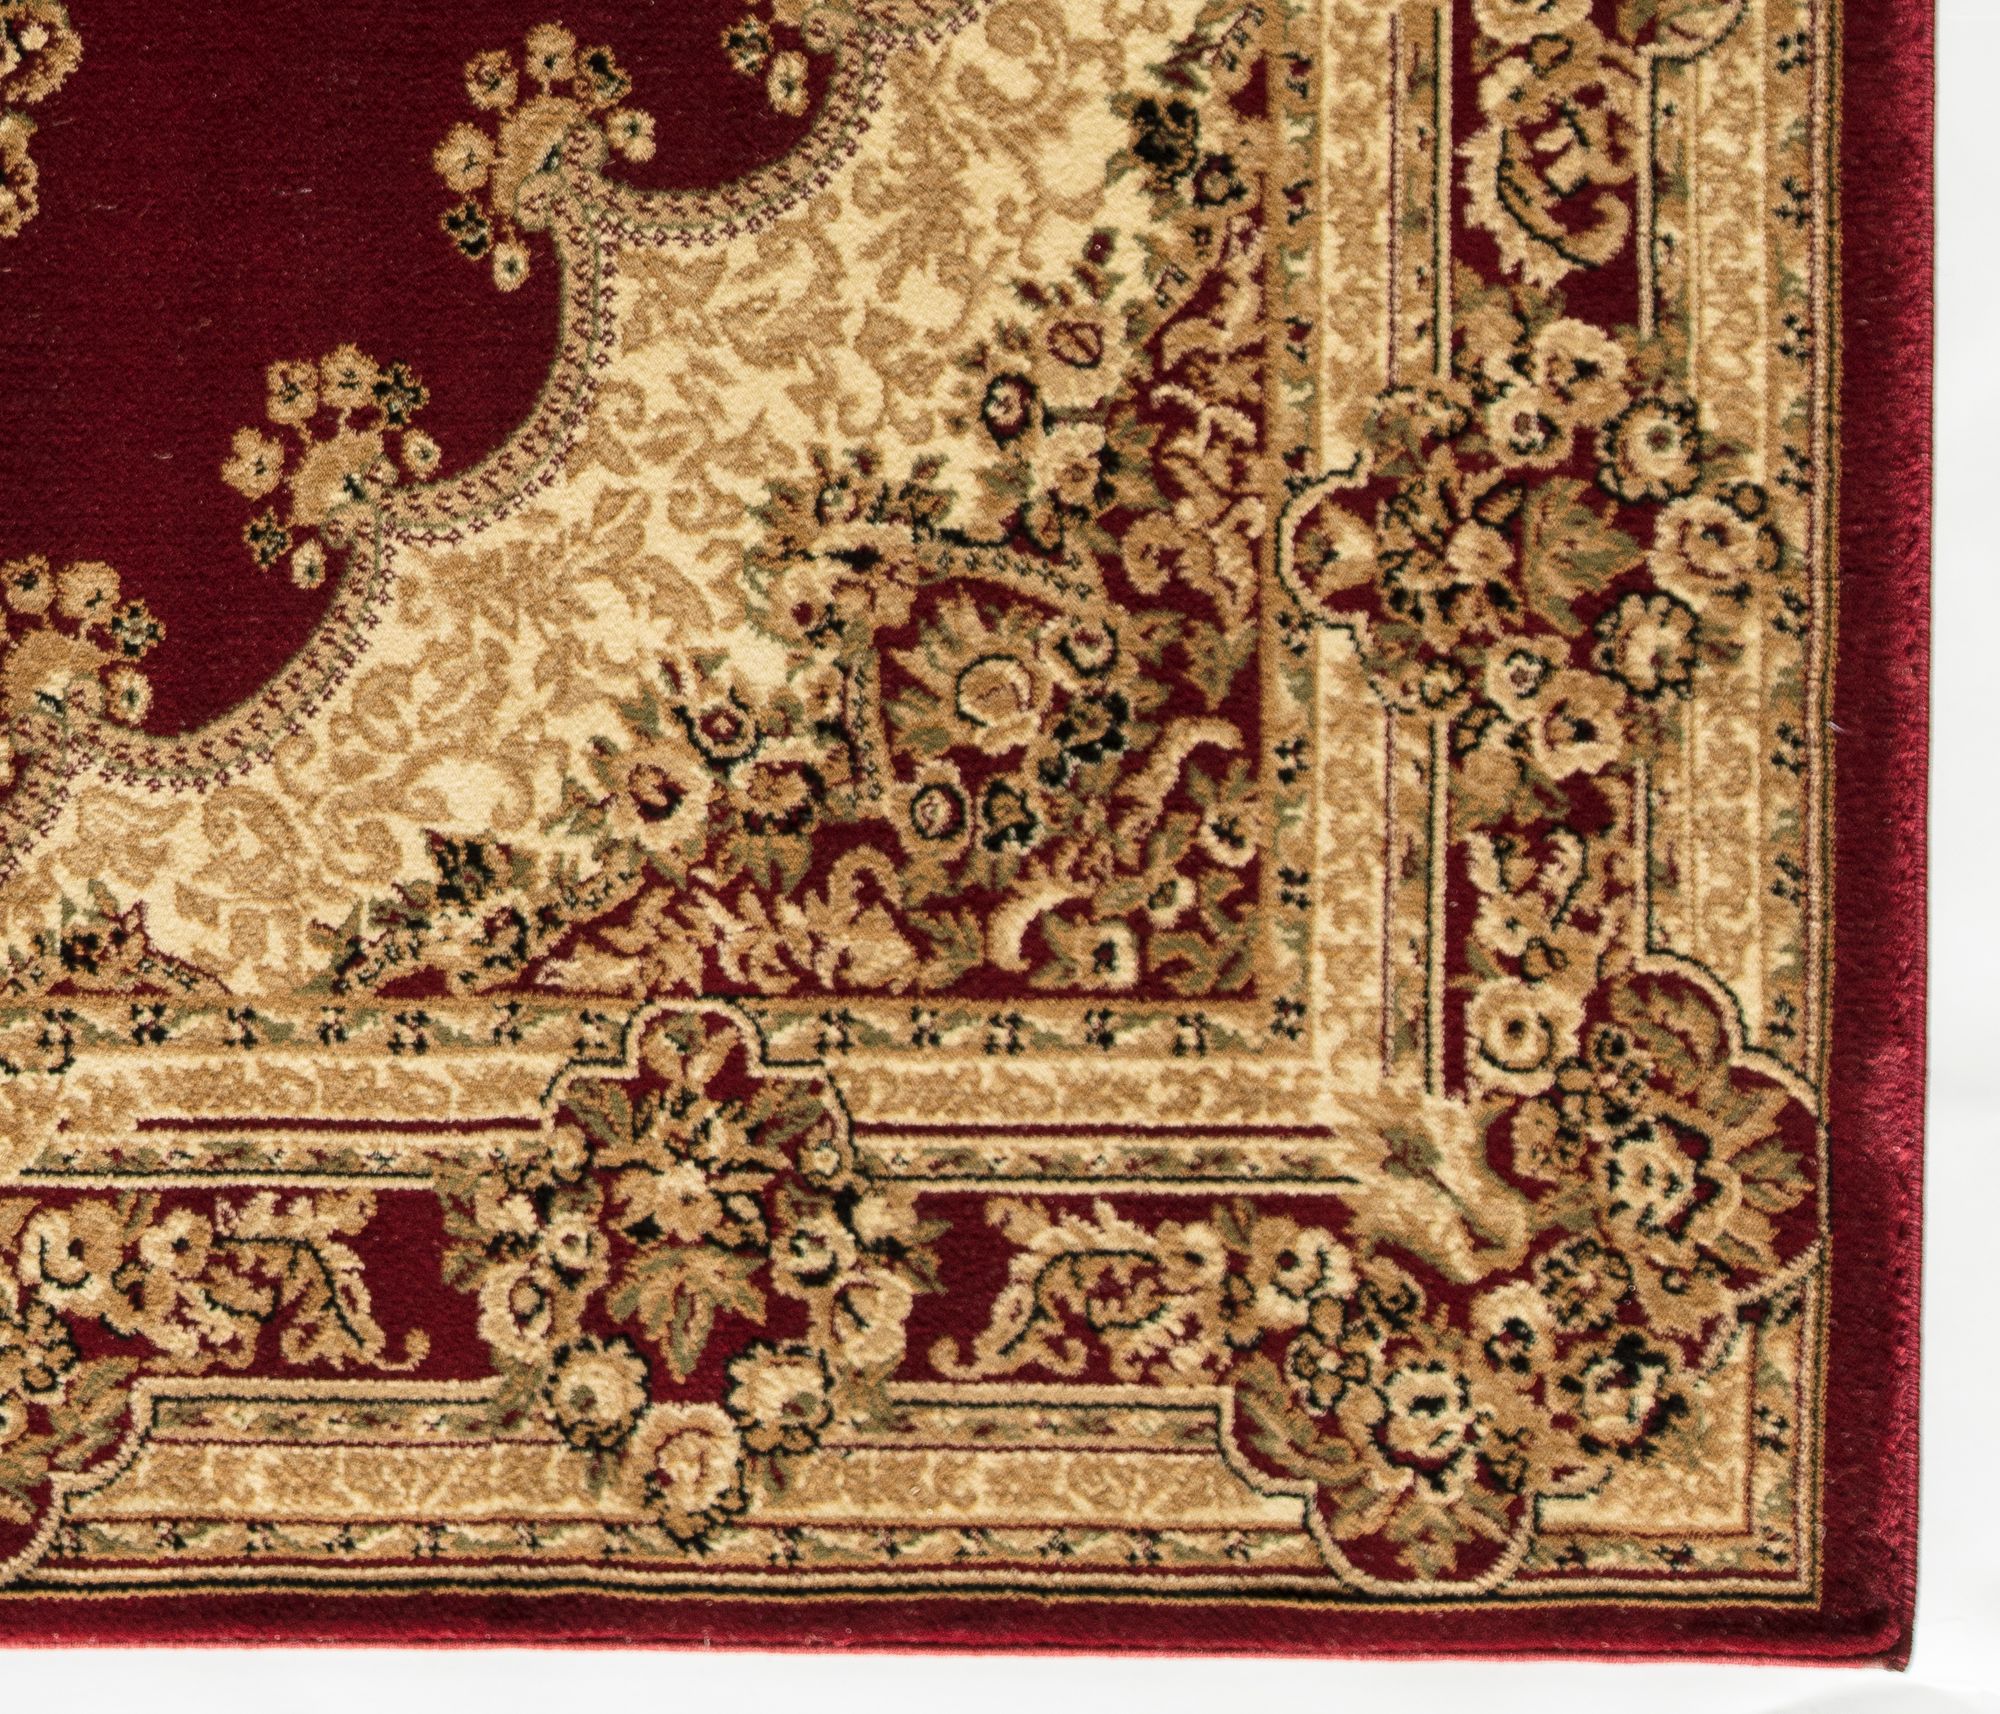 Rugs America Vista 807-RED Kerman Red Oriental Traditional Red Area Rug, 2'x2'11" - image 3 of 3